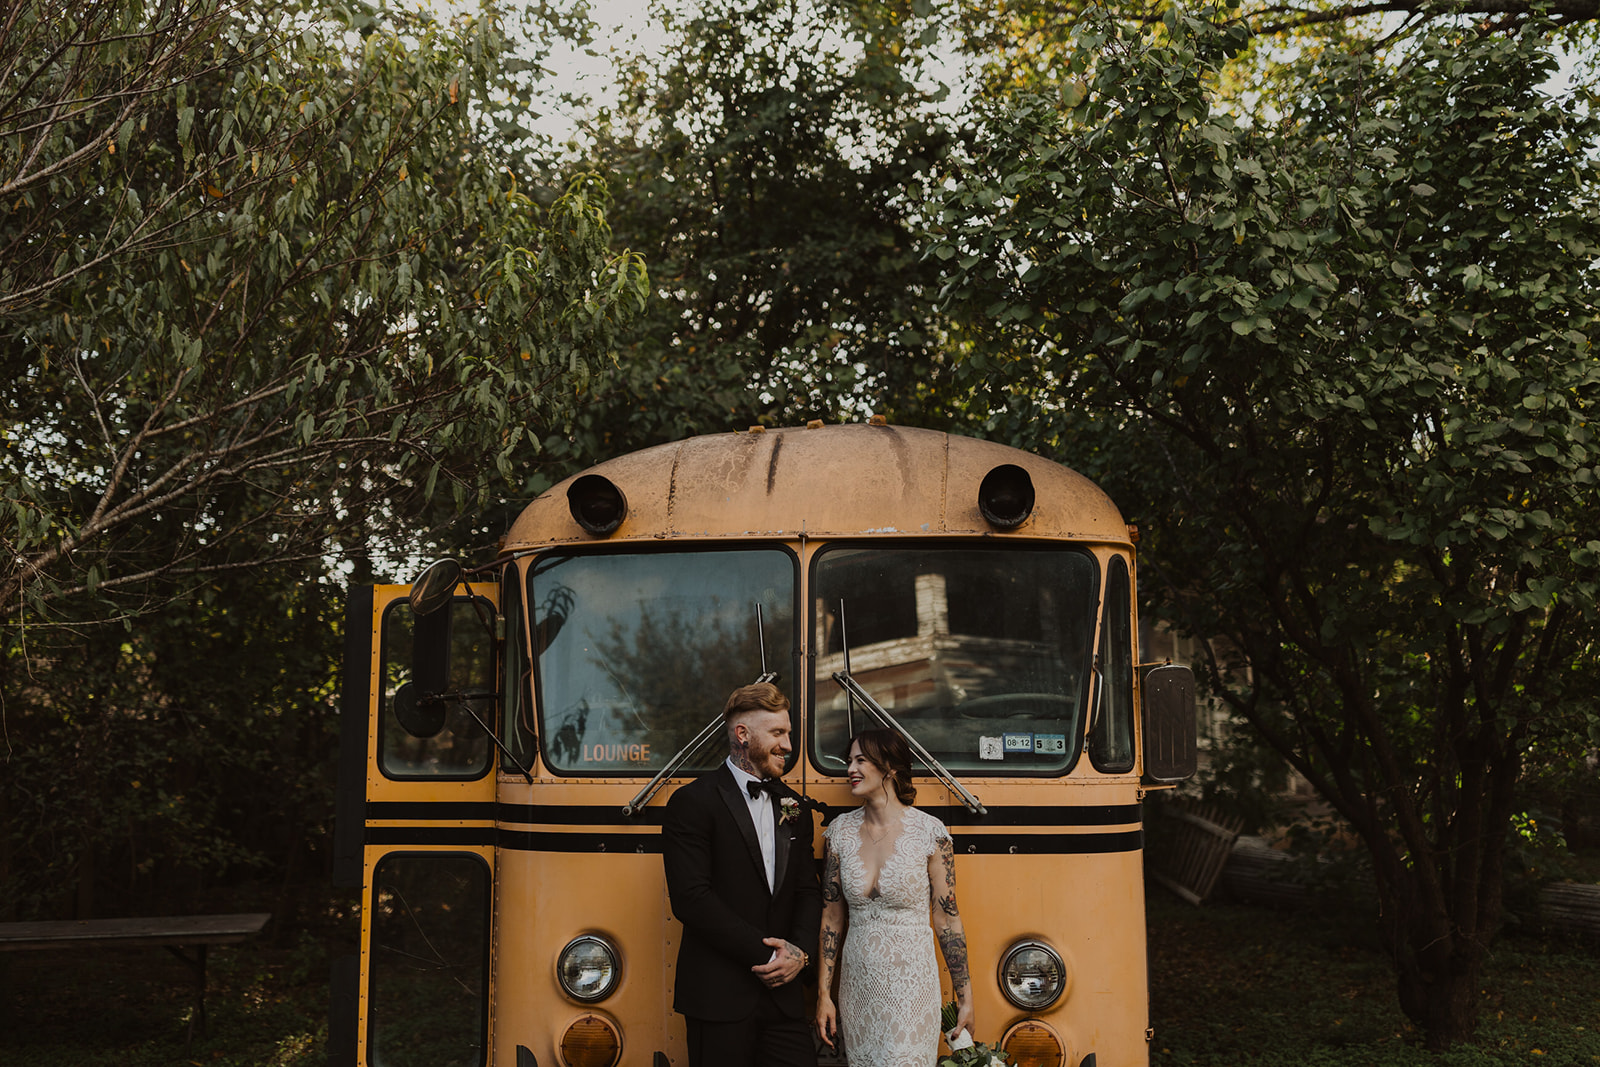 couple poses beside school bus at outdoor wedding